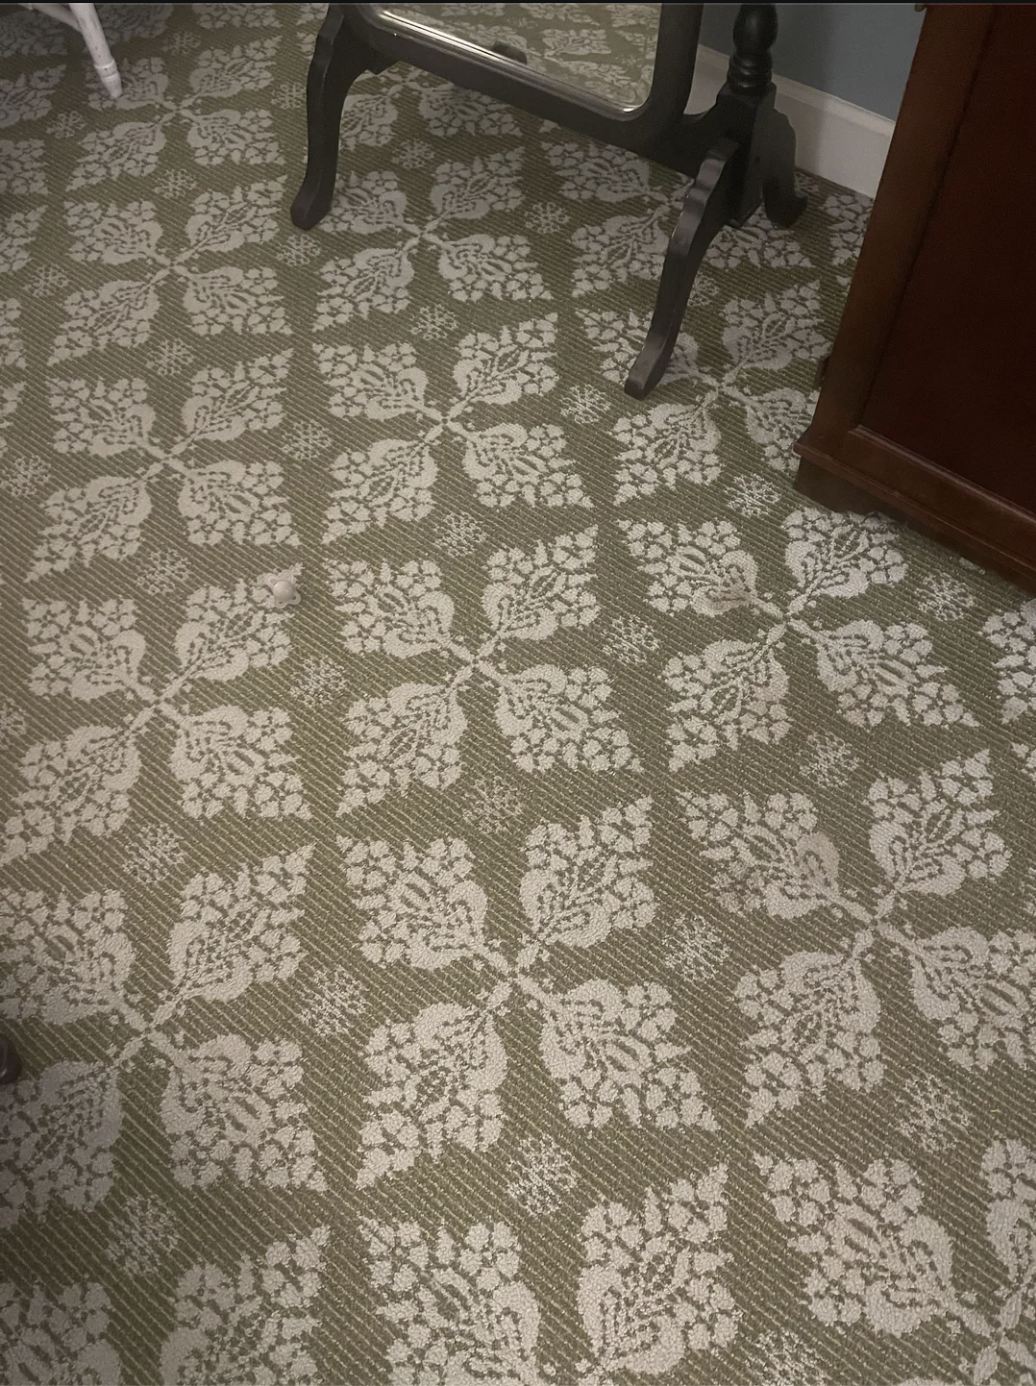 Patterned carpet with a floral design, part of a mirror leg, and a piece of furniture visible at the edge